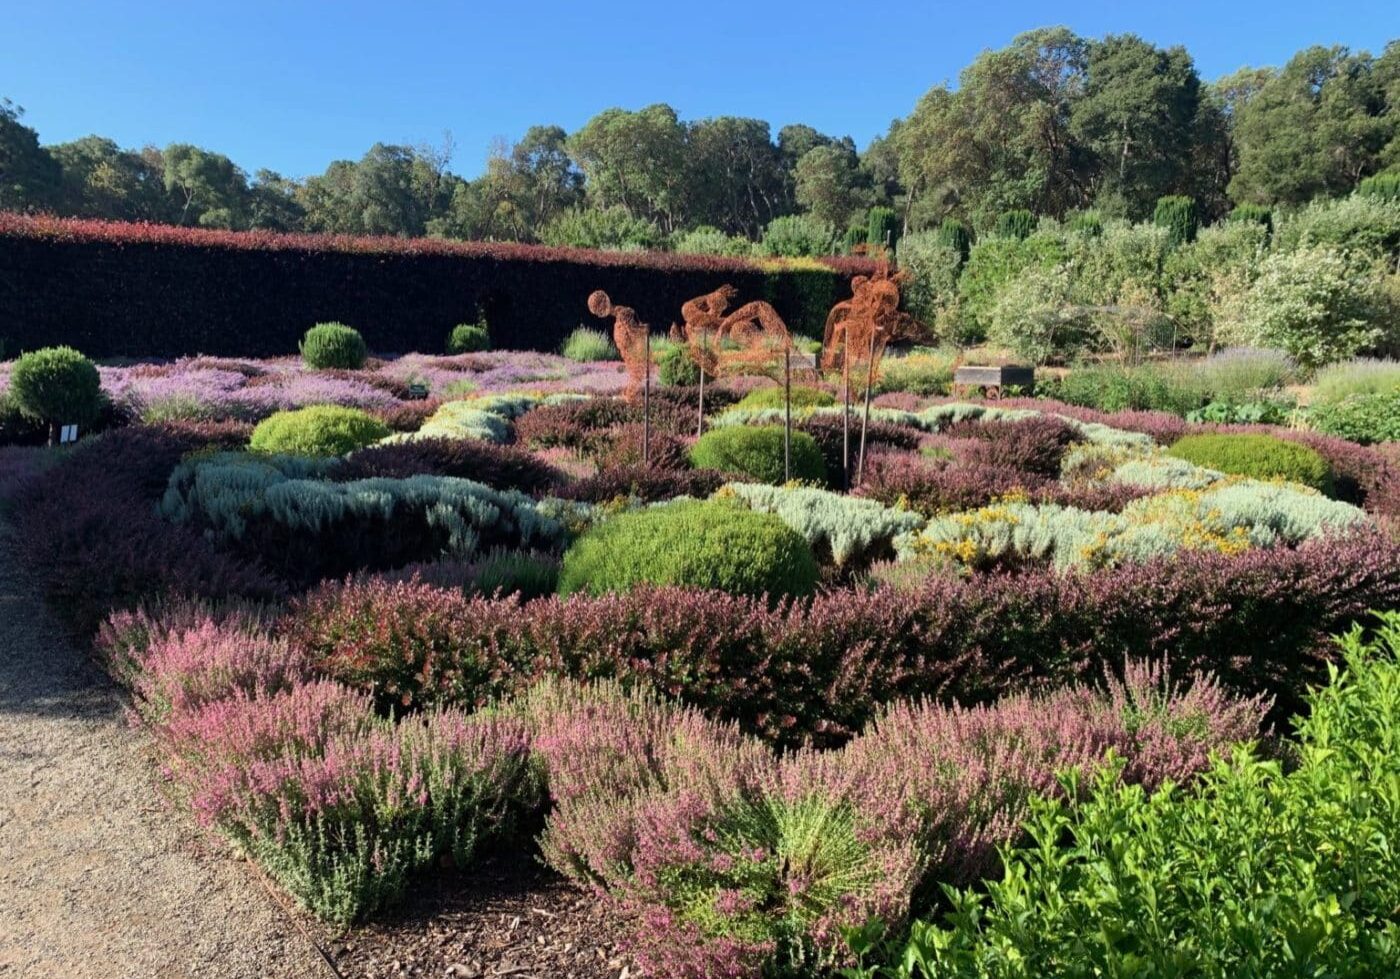 Don’t miss the Knot Garden during your visit!